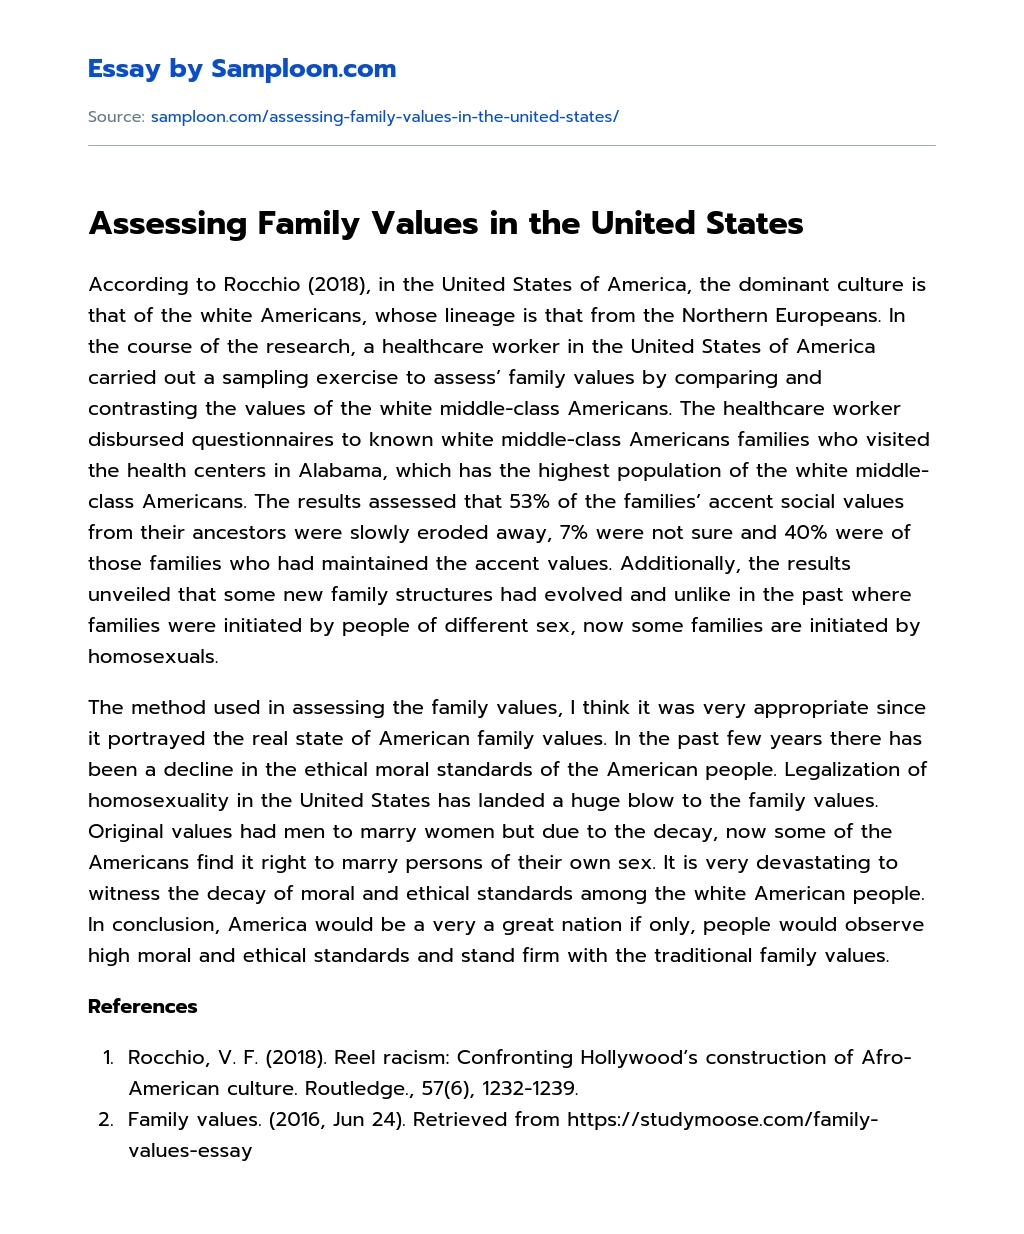 Assessing Family Values in the United States essay